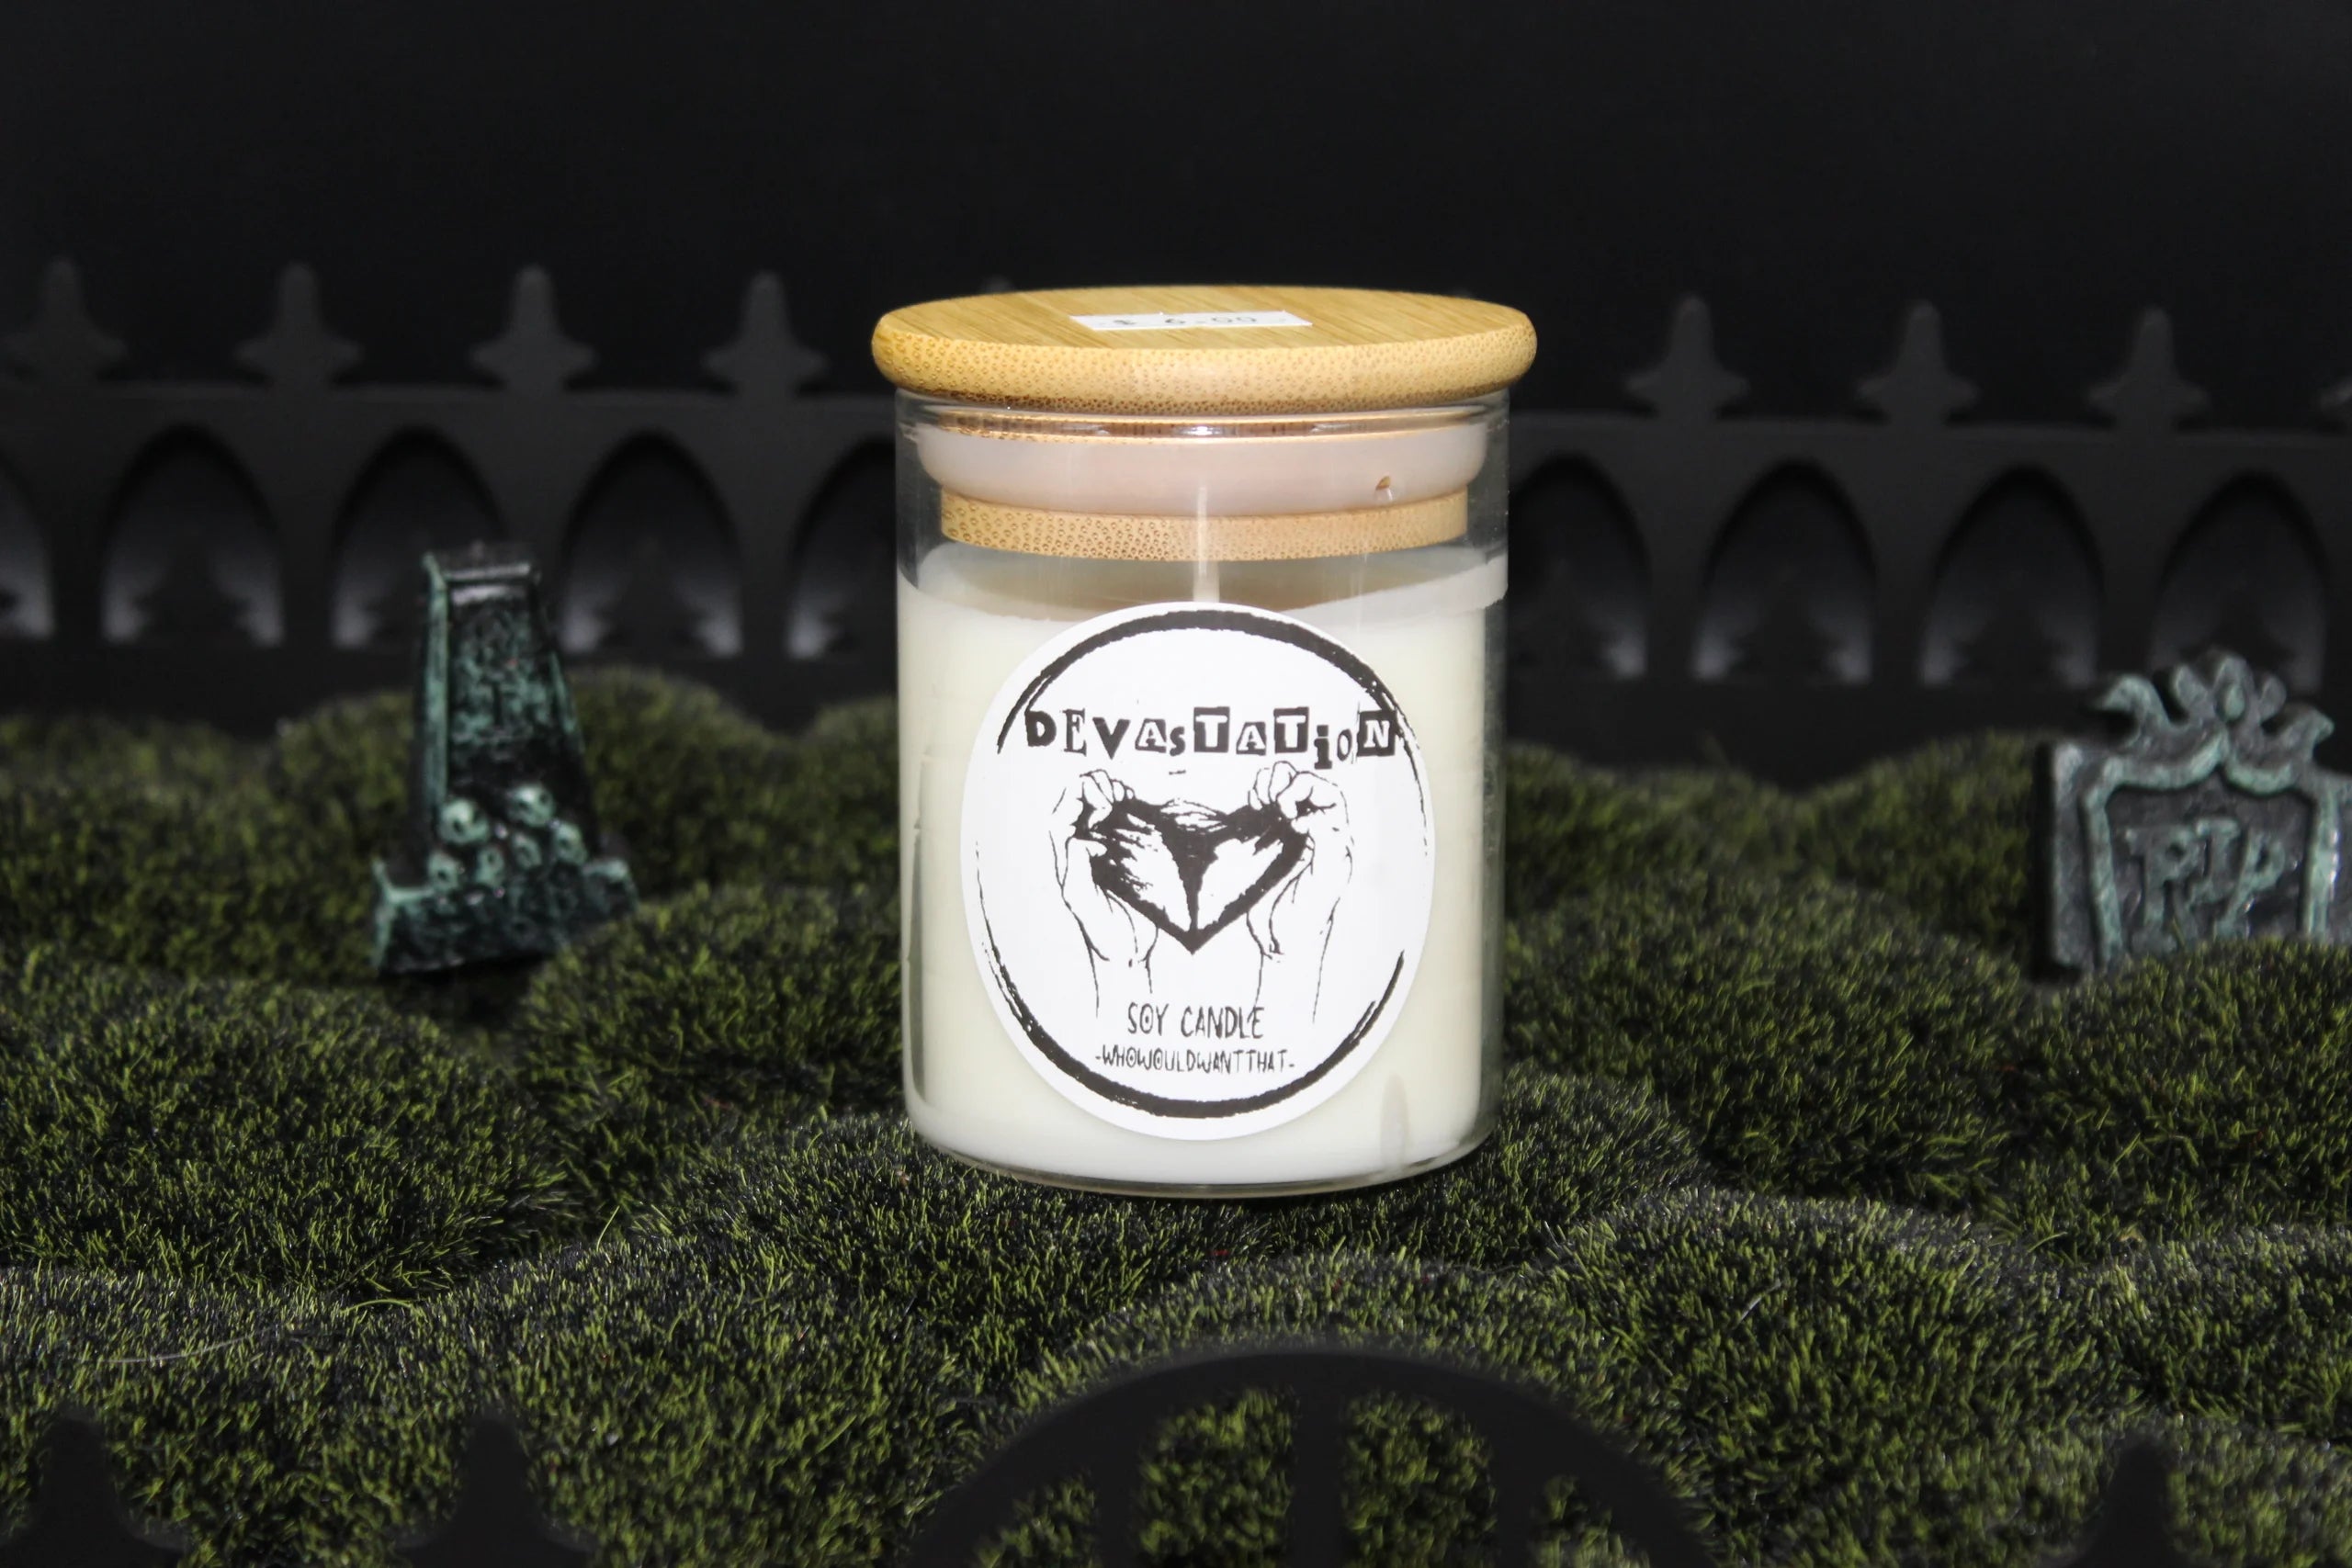 Devastation Candle - 8 oz Scented Soy Candle - Who Would Want That